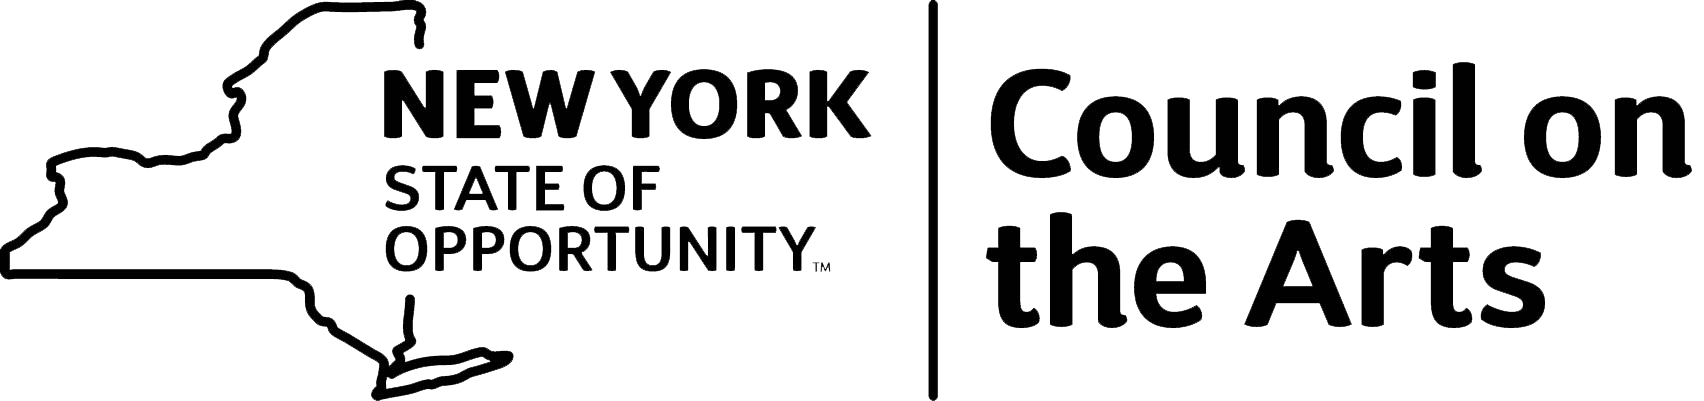 New York State of Opportunity over a black outline of the state of NY, combined with the words Council on the Arts in black sans-serif text